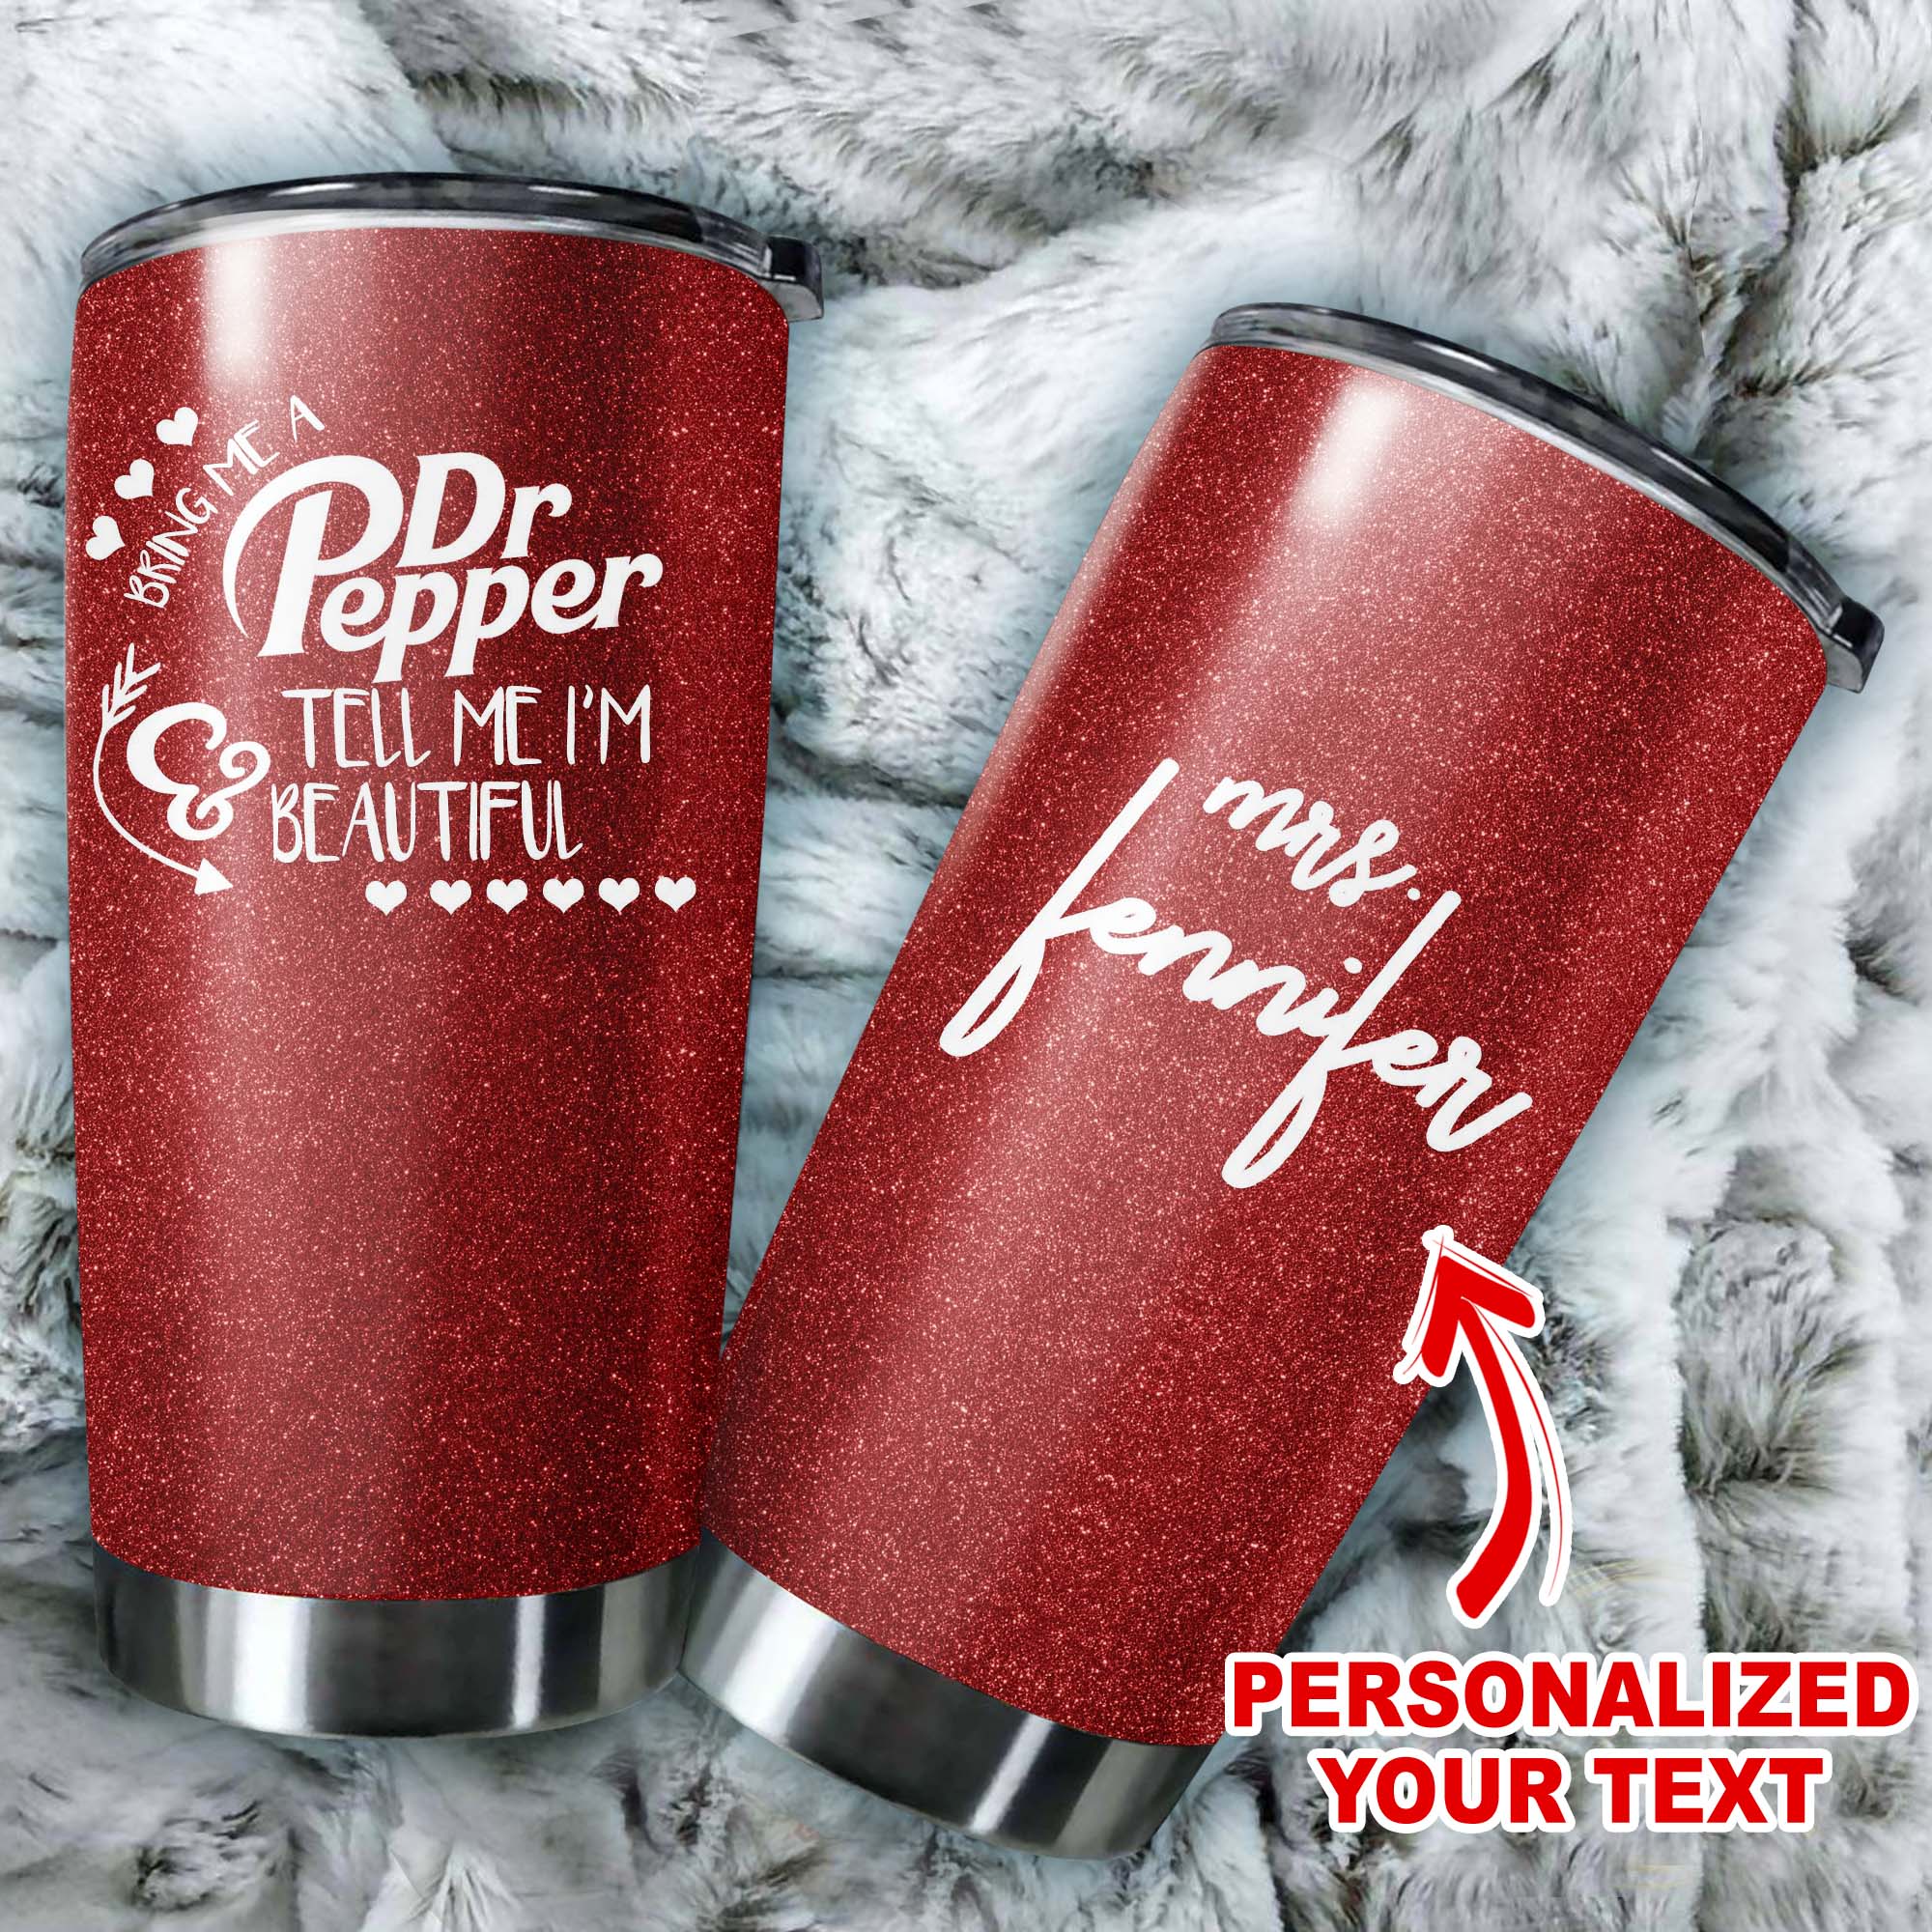 Personalized dr pepper tell me i'm beautiful all over printed tumbler 1